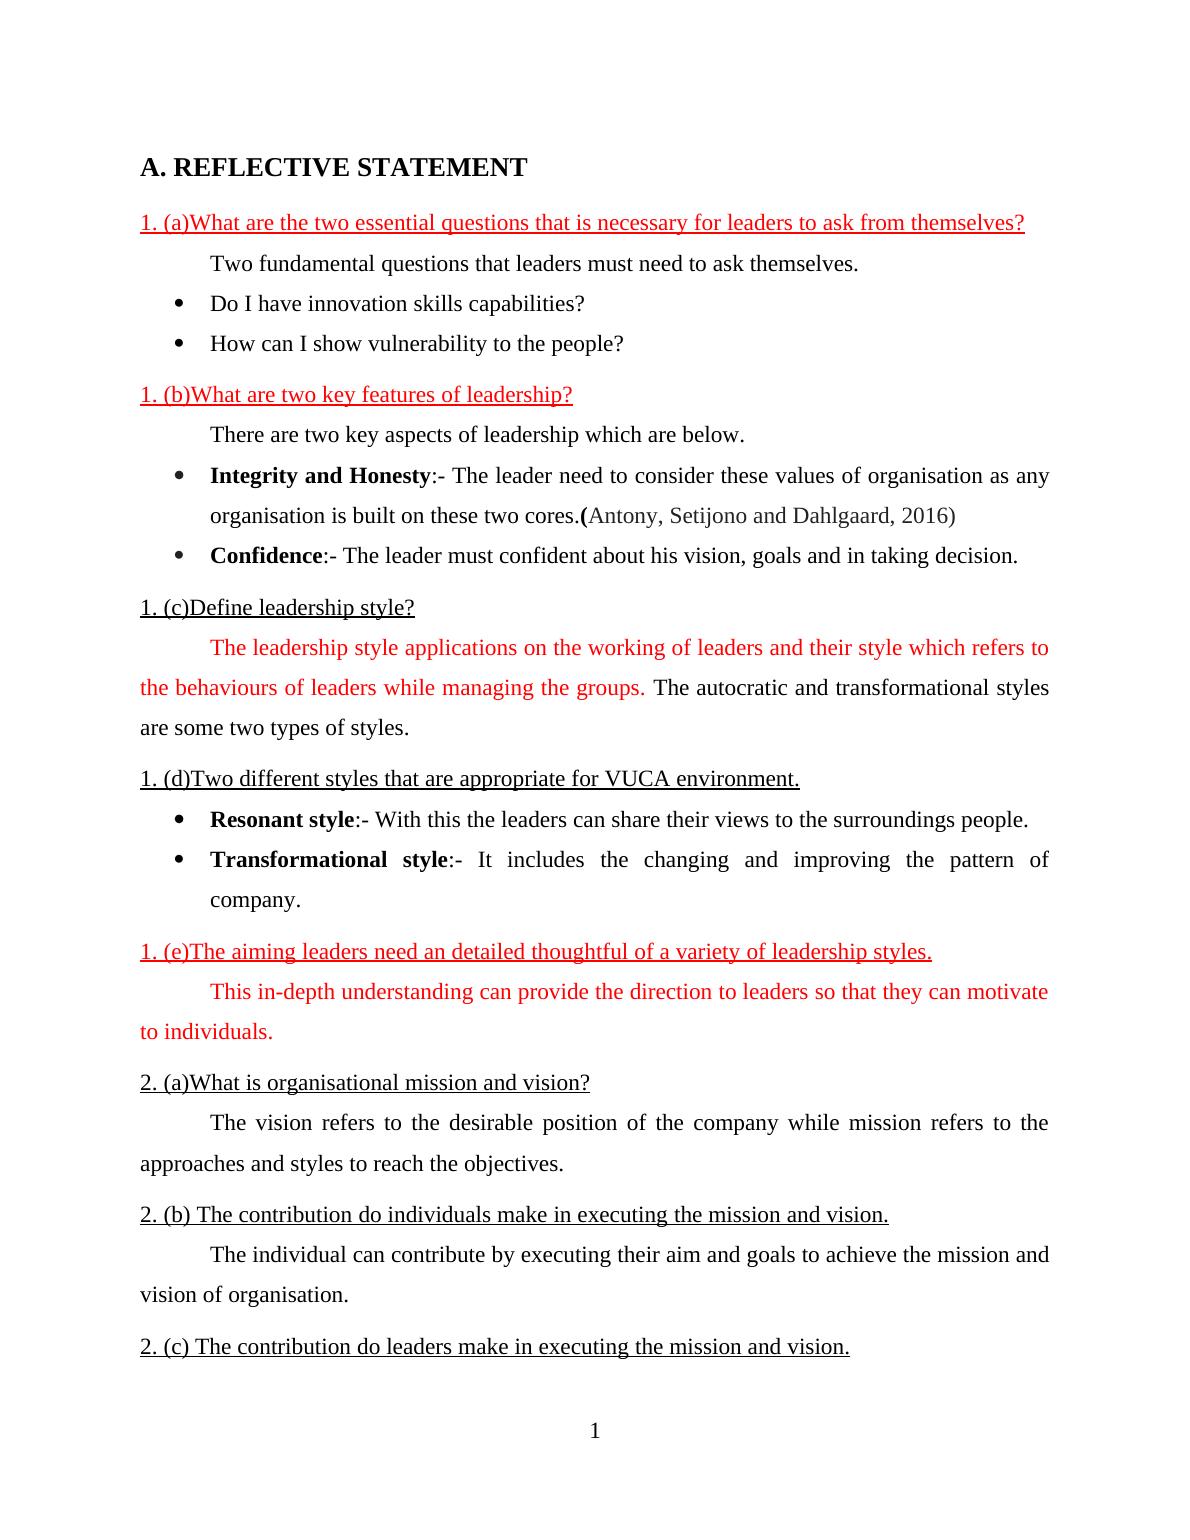 Leading Business Organisations Student Guidelines_4